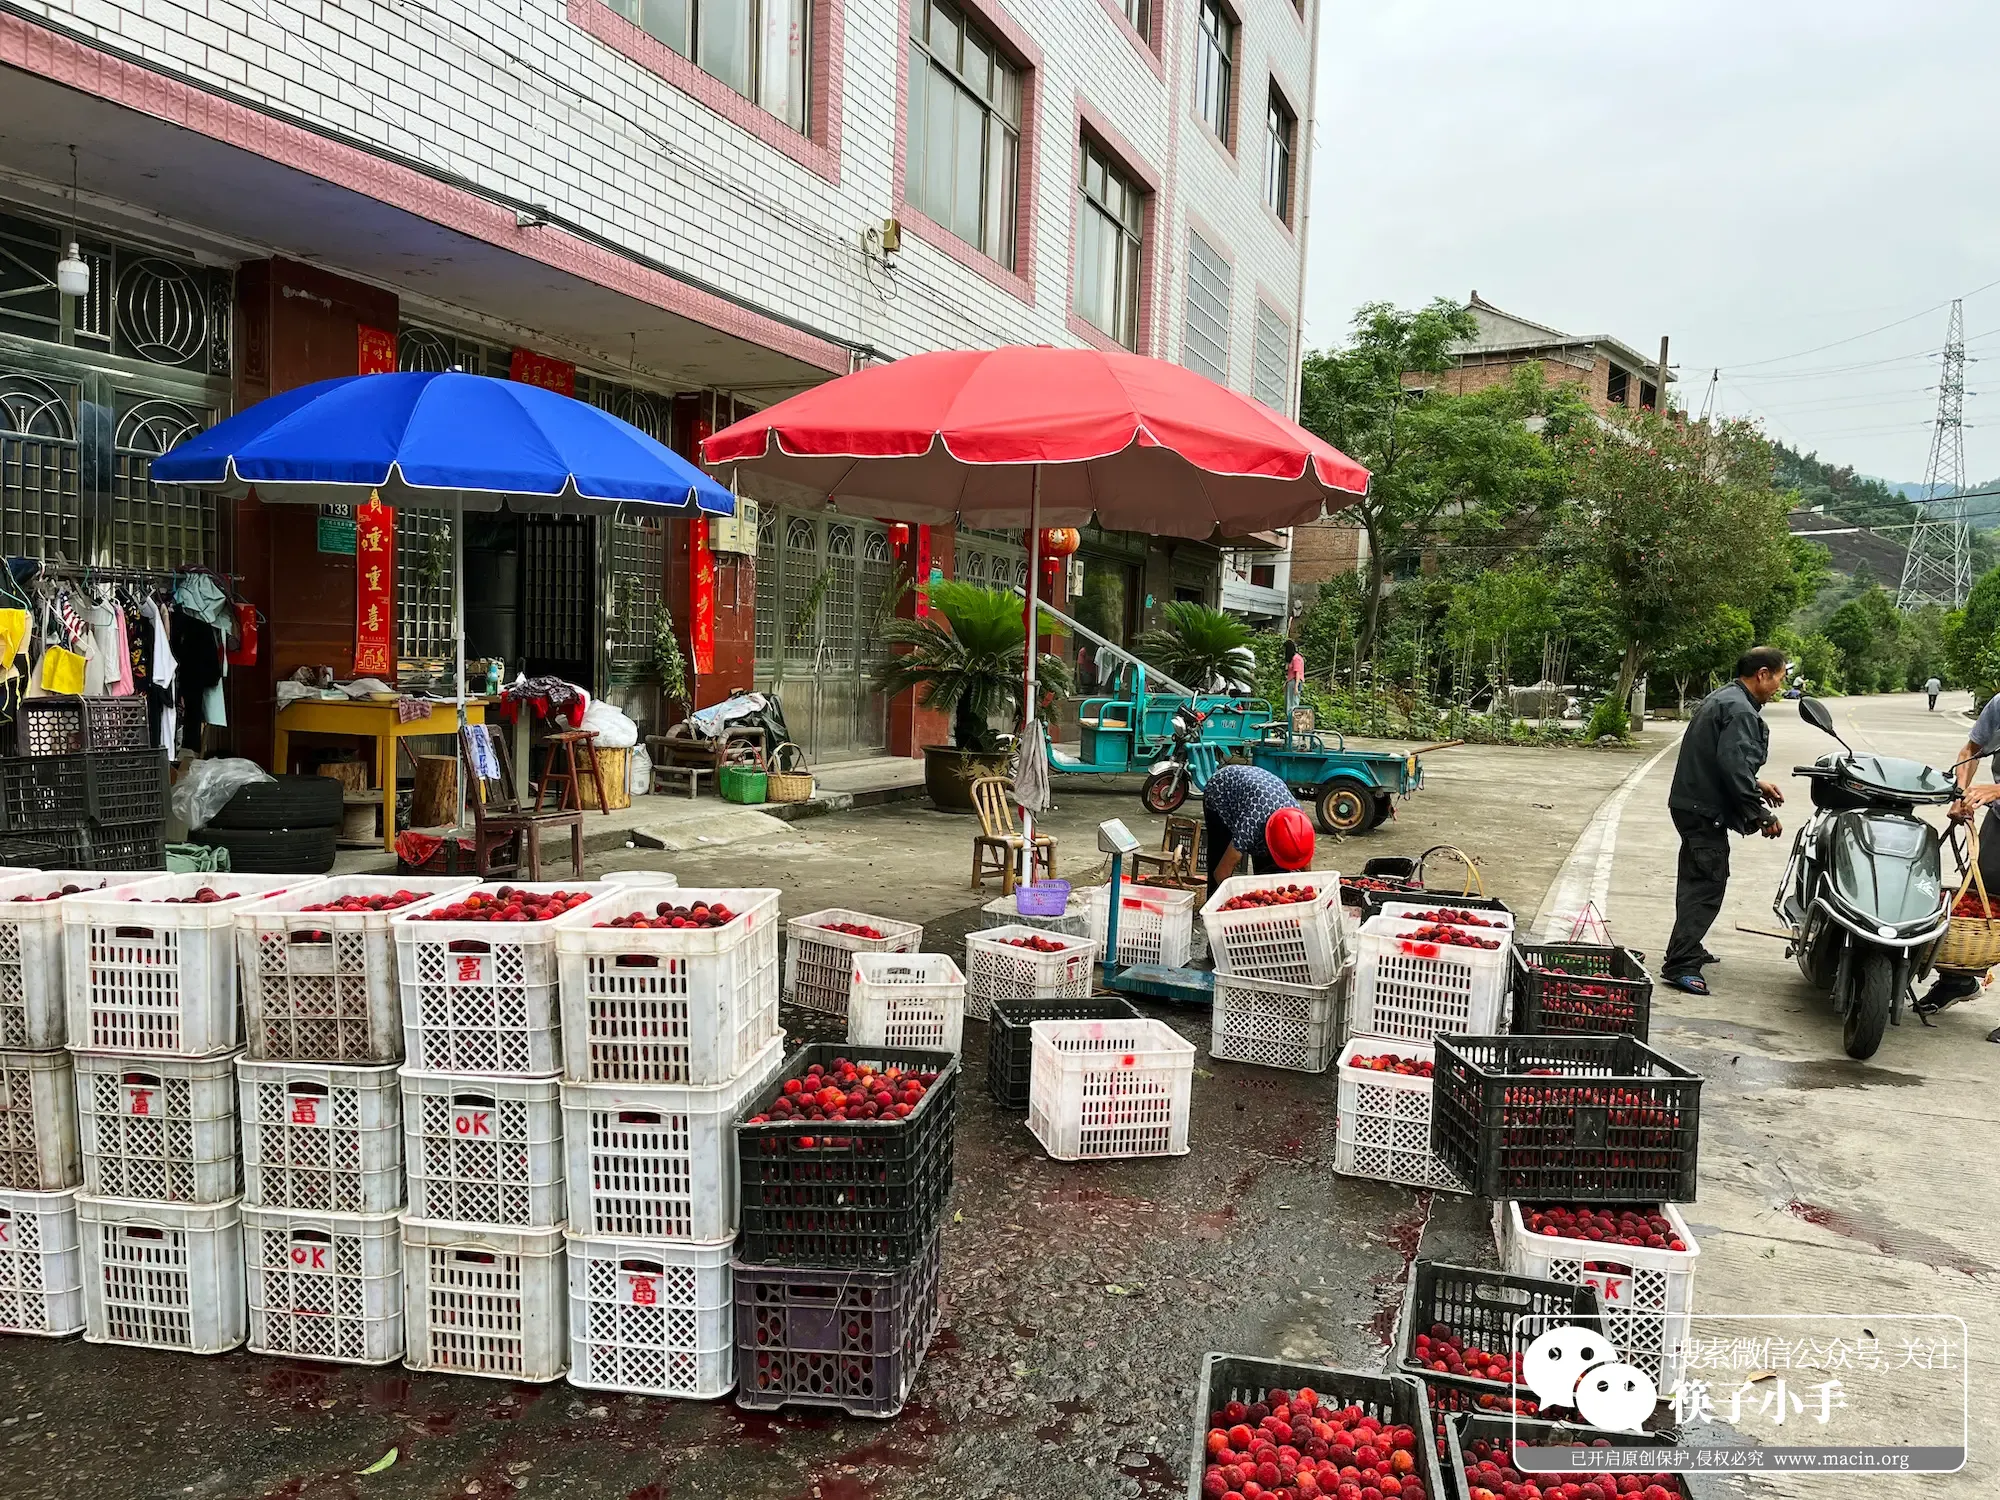 Can you believe the red bayberry that costs one yuan per catty?